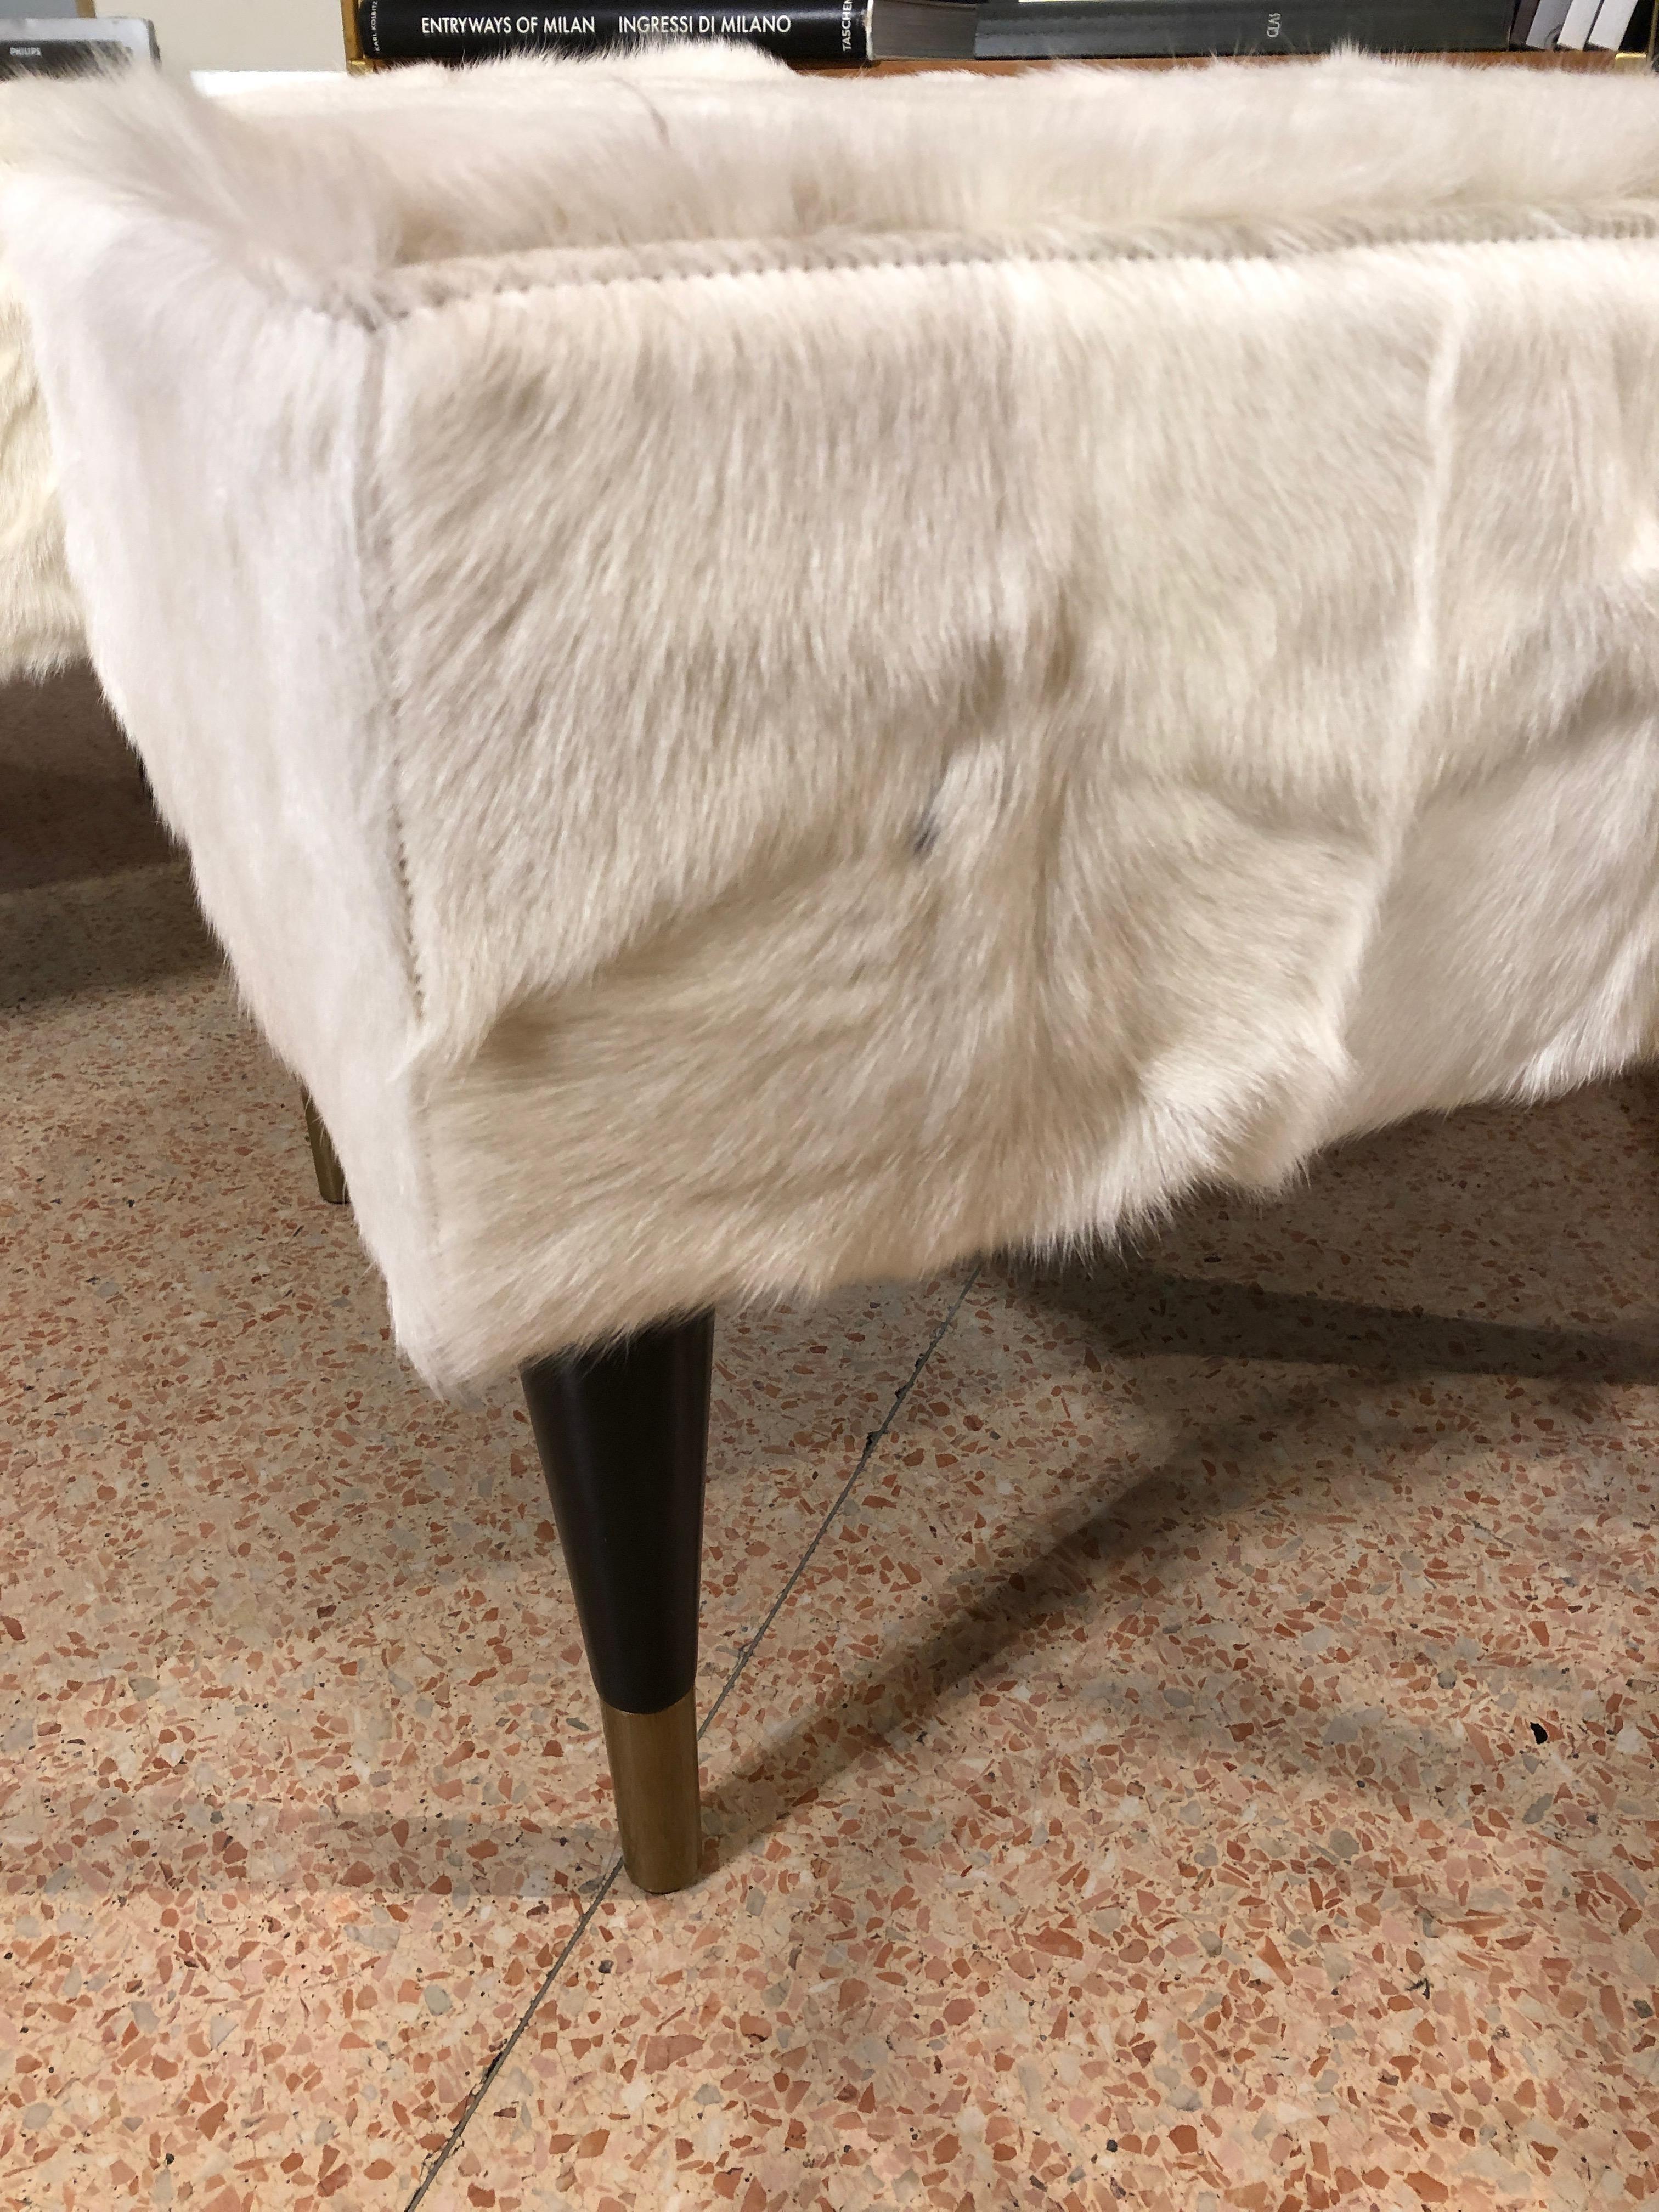 Contemporary Customizable White Fur Black Legs Bronze Endings Stools or Benches 1950s Style